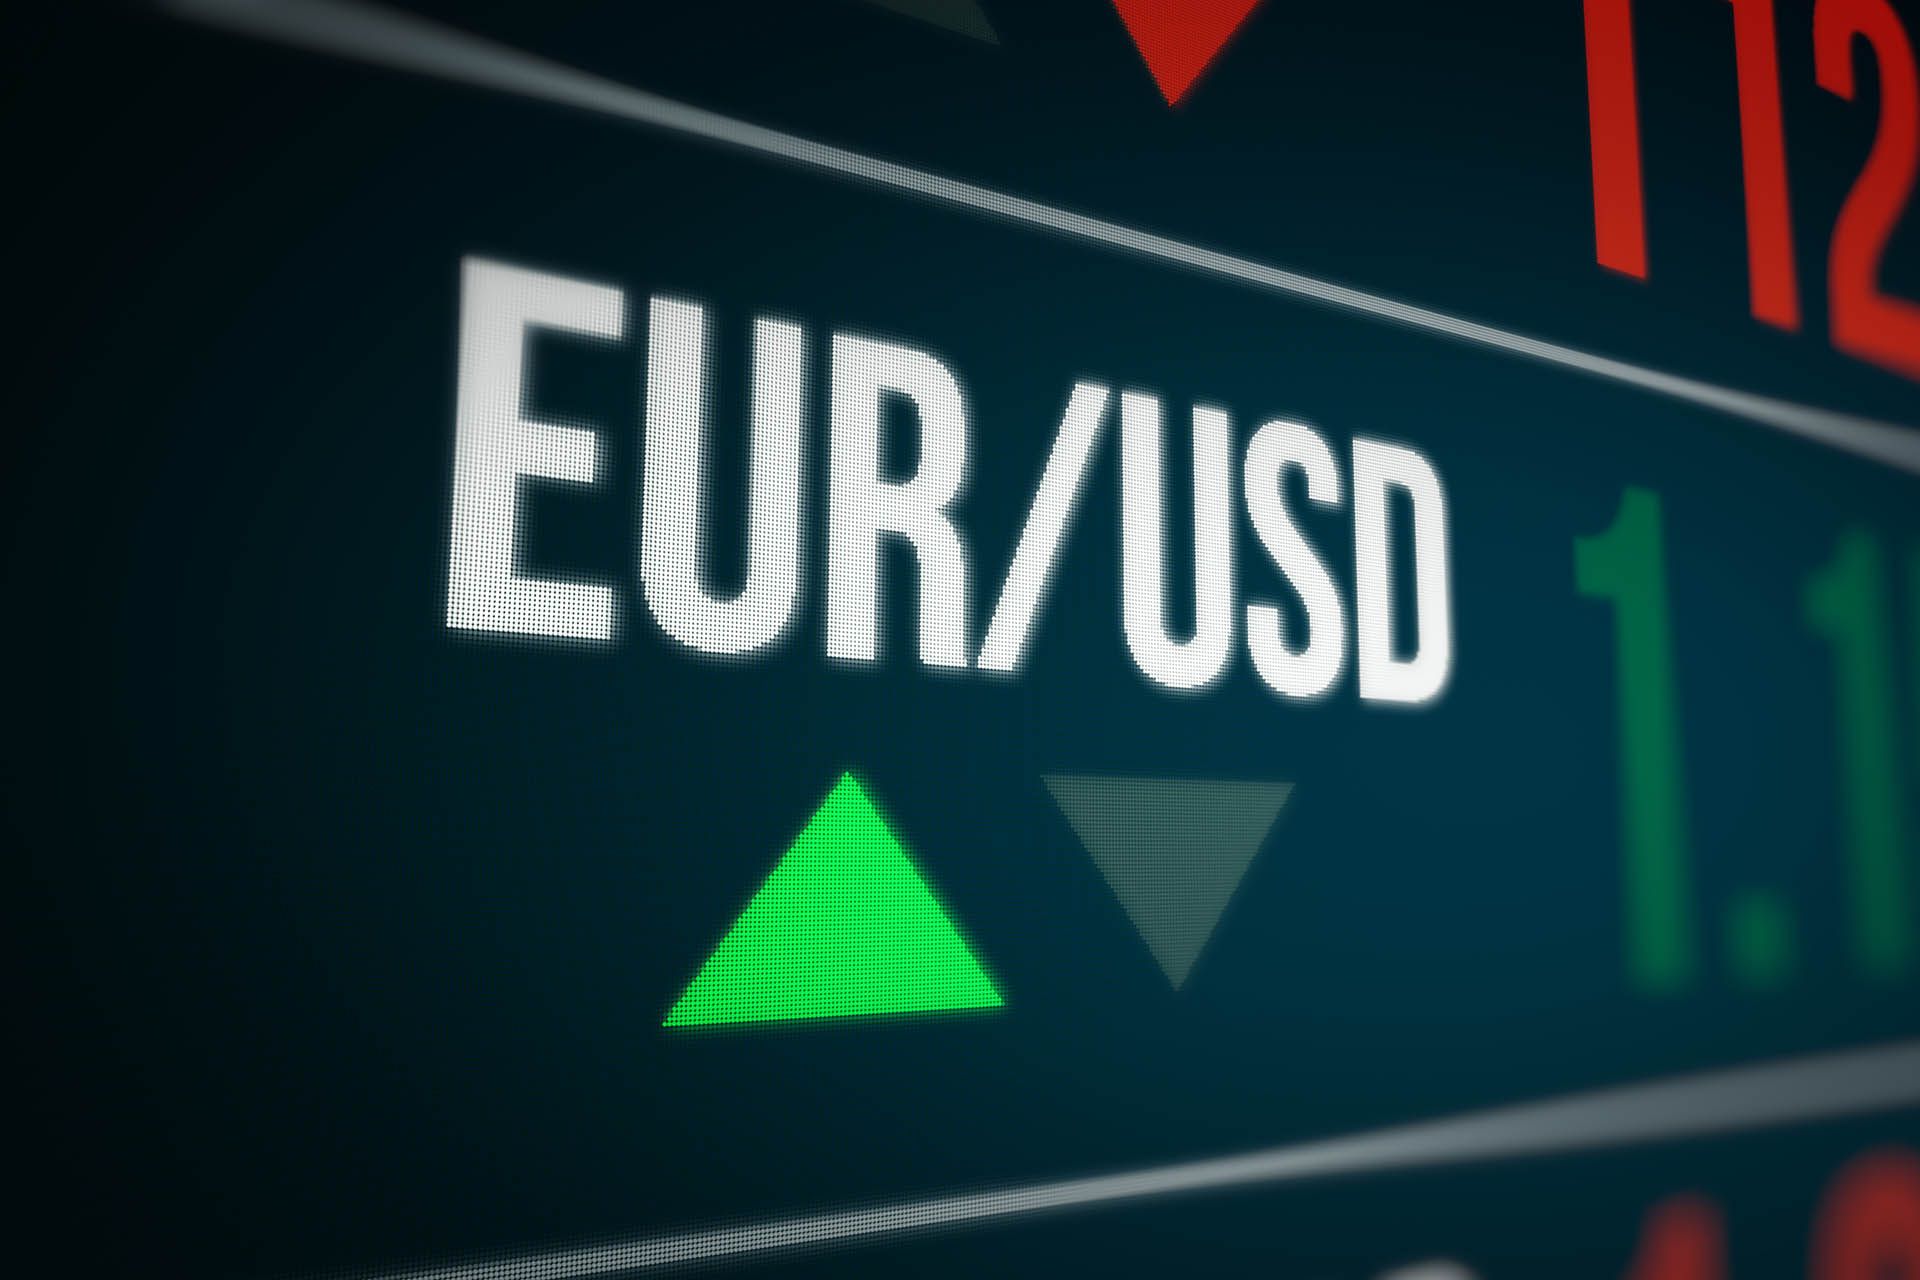 June, 24 - EUR/USD loses further the grip and slips back